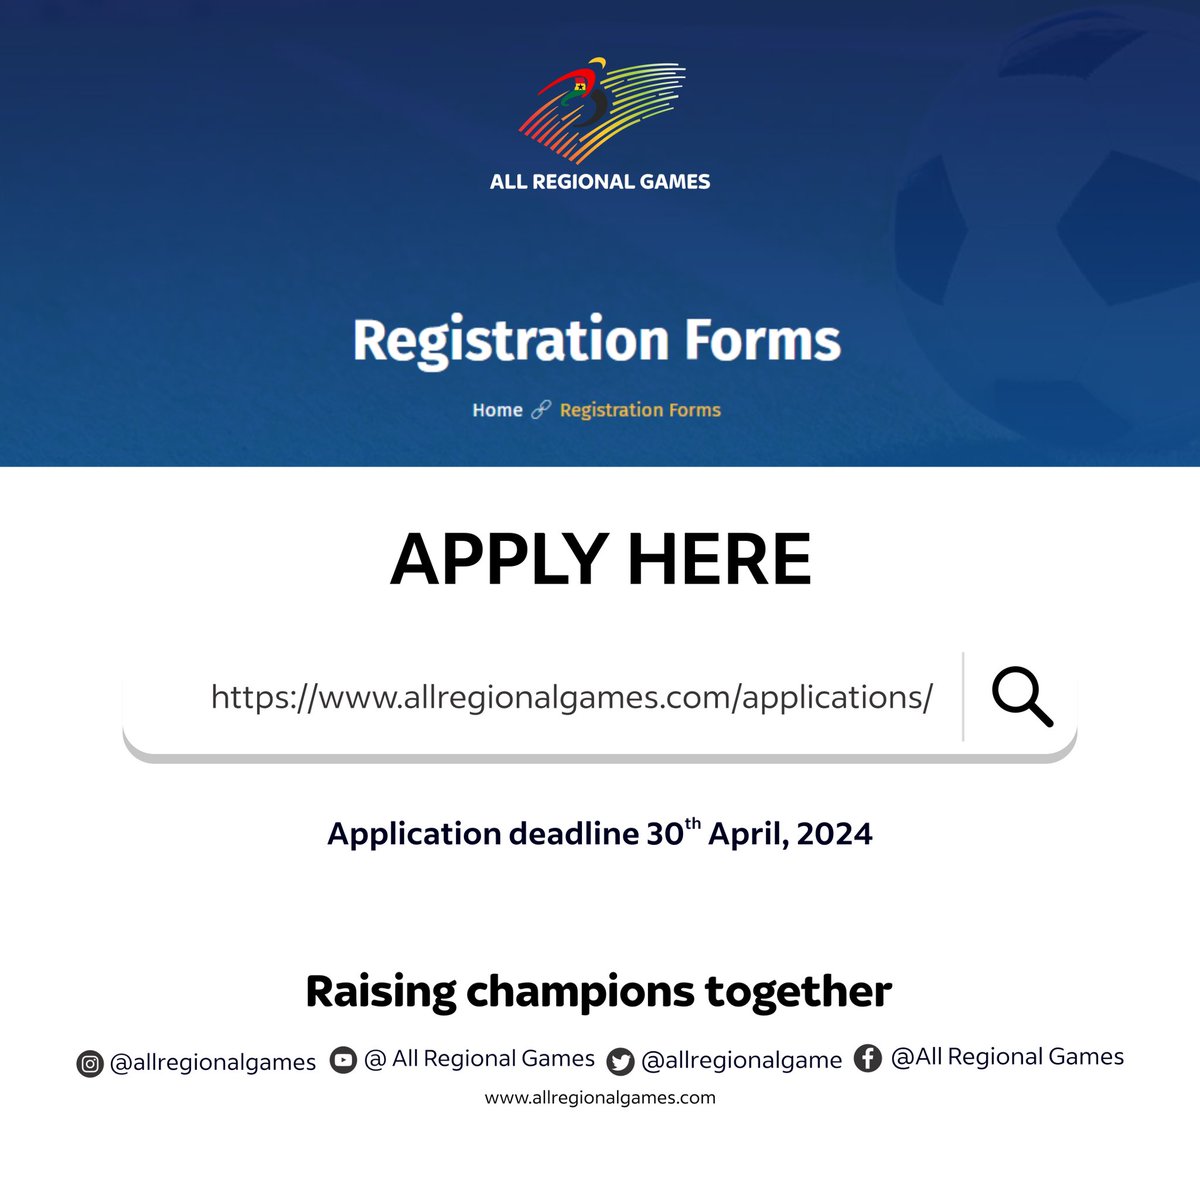 We are searching for Ghana's top athletes. Register now via shorturl.at/apTX3 to compete in your chosen sport.  Be a part of history - applications close April 30th. #AllRegionalGames #TheTimeIsNow